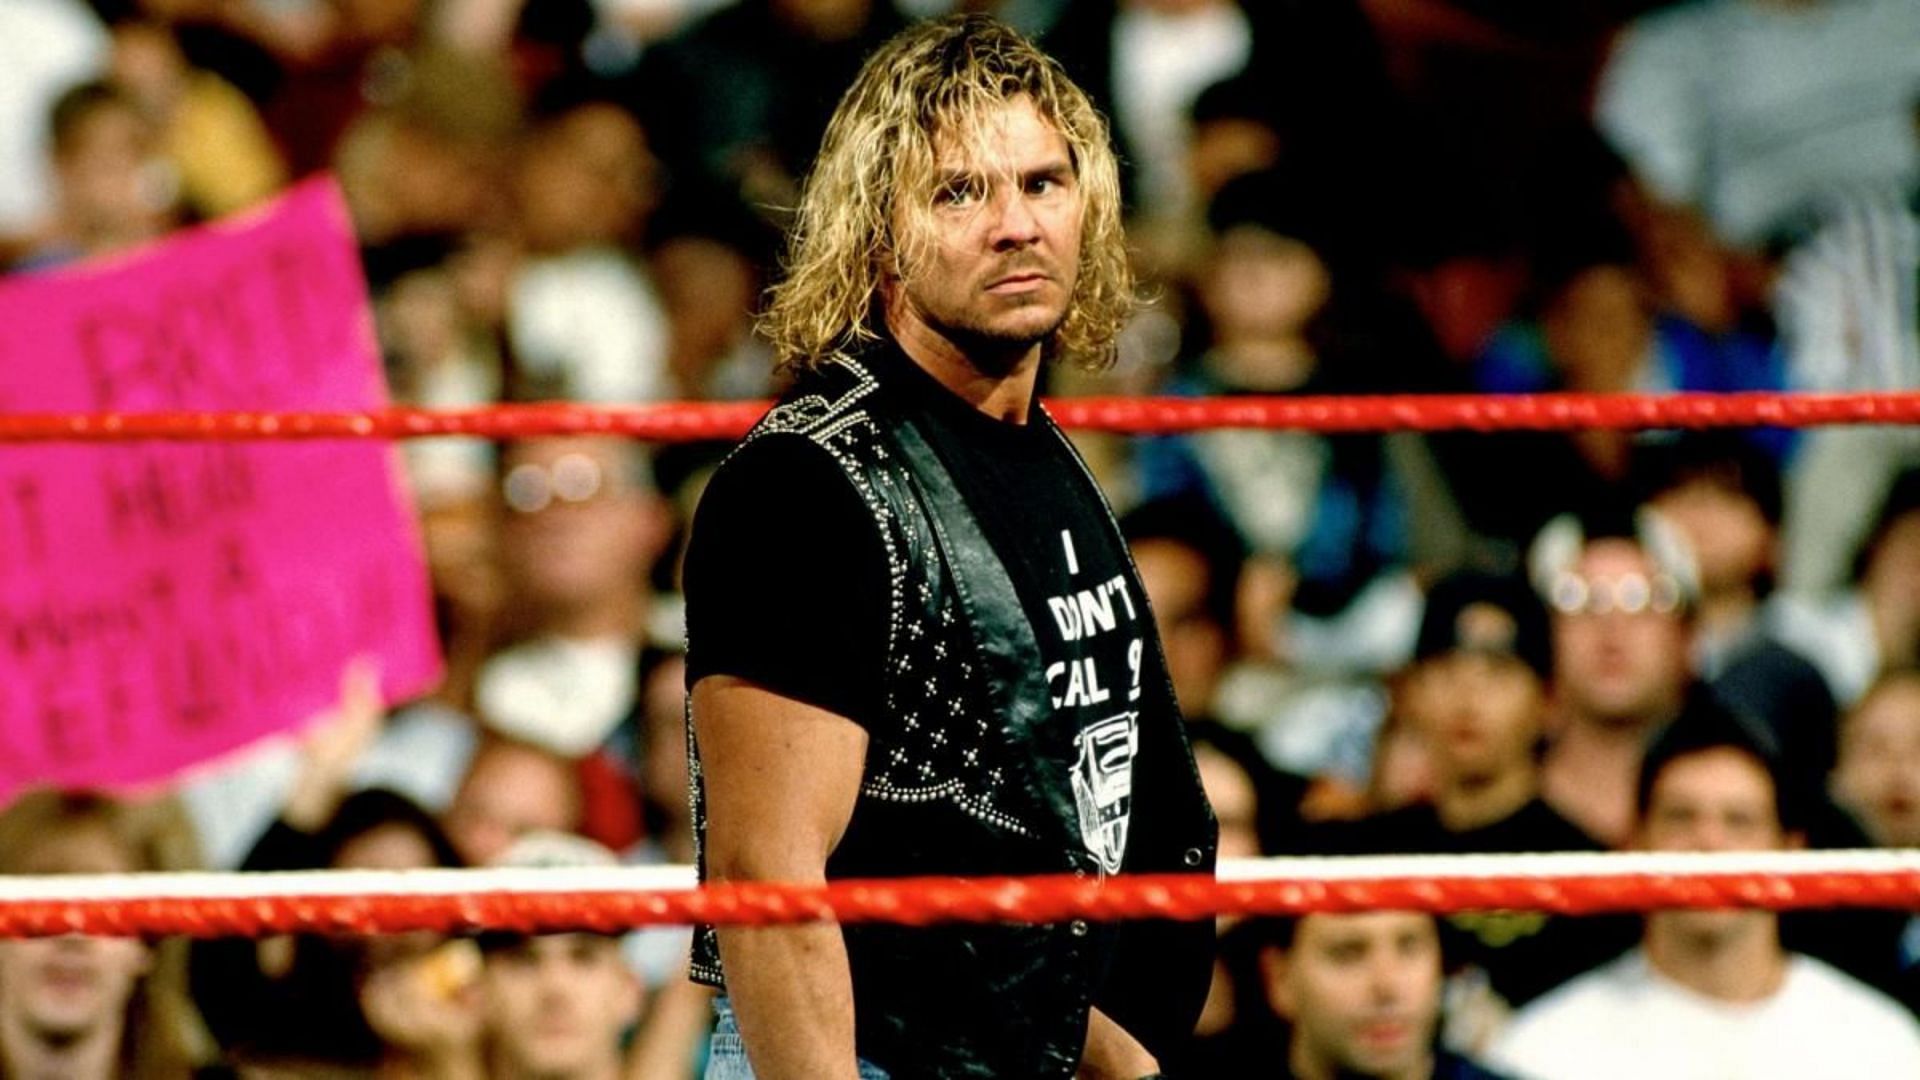 Brian Pillman died in his hotel room in 1997